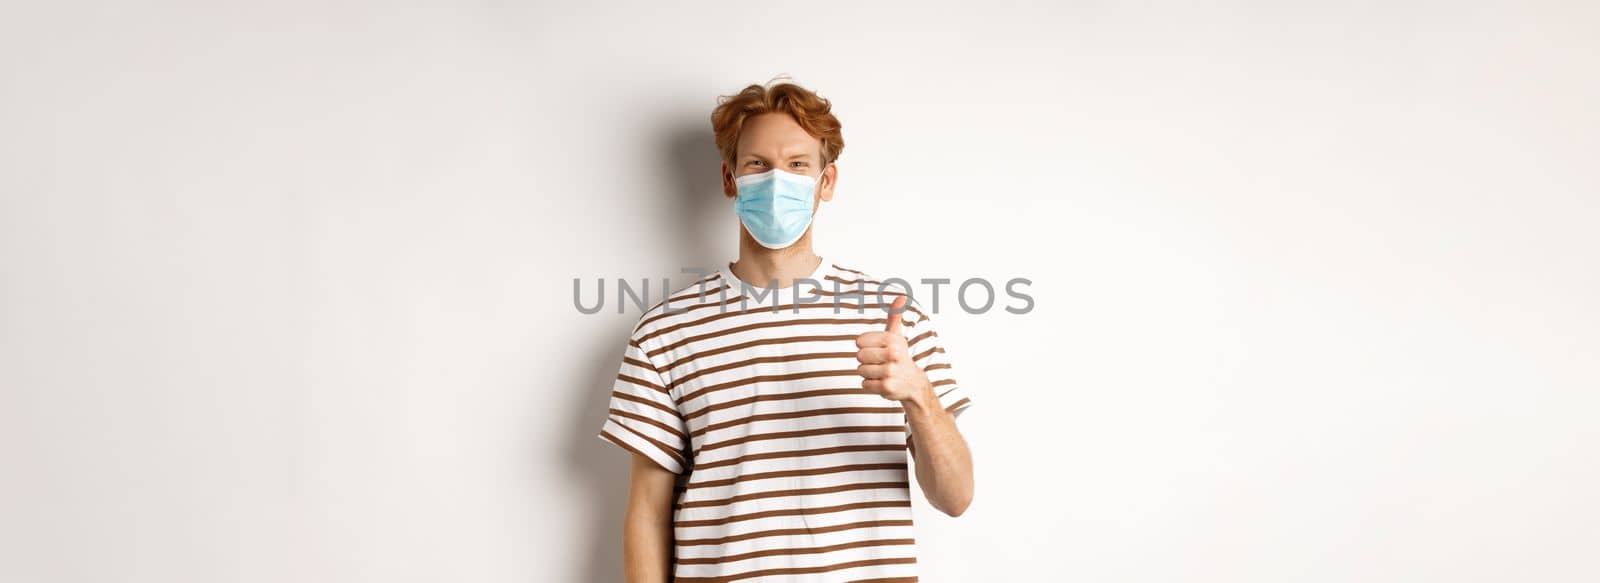 Covid-19, pandemic and social distancing concept. Young man with red hair wearing medical mask to prevent catching coronavirus, showing thumbs-up, white background.